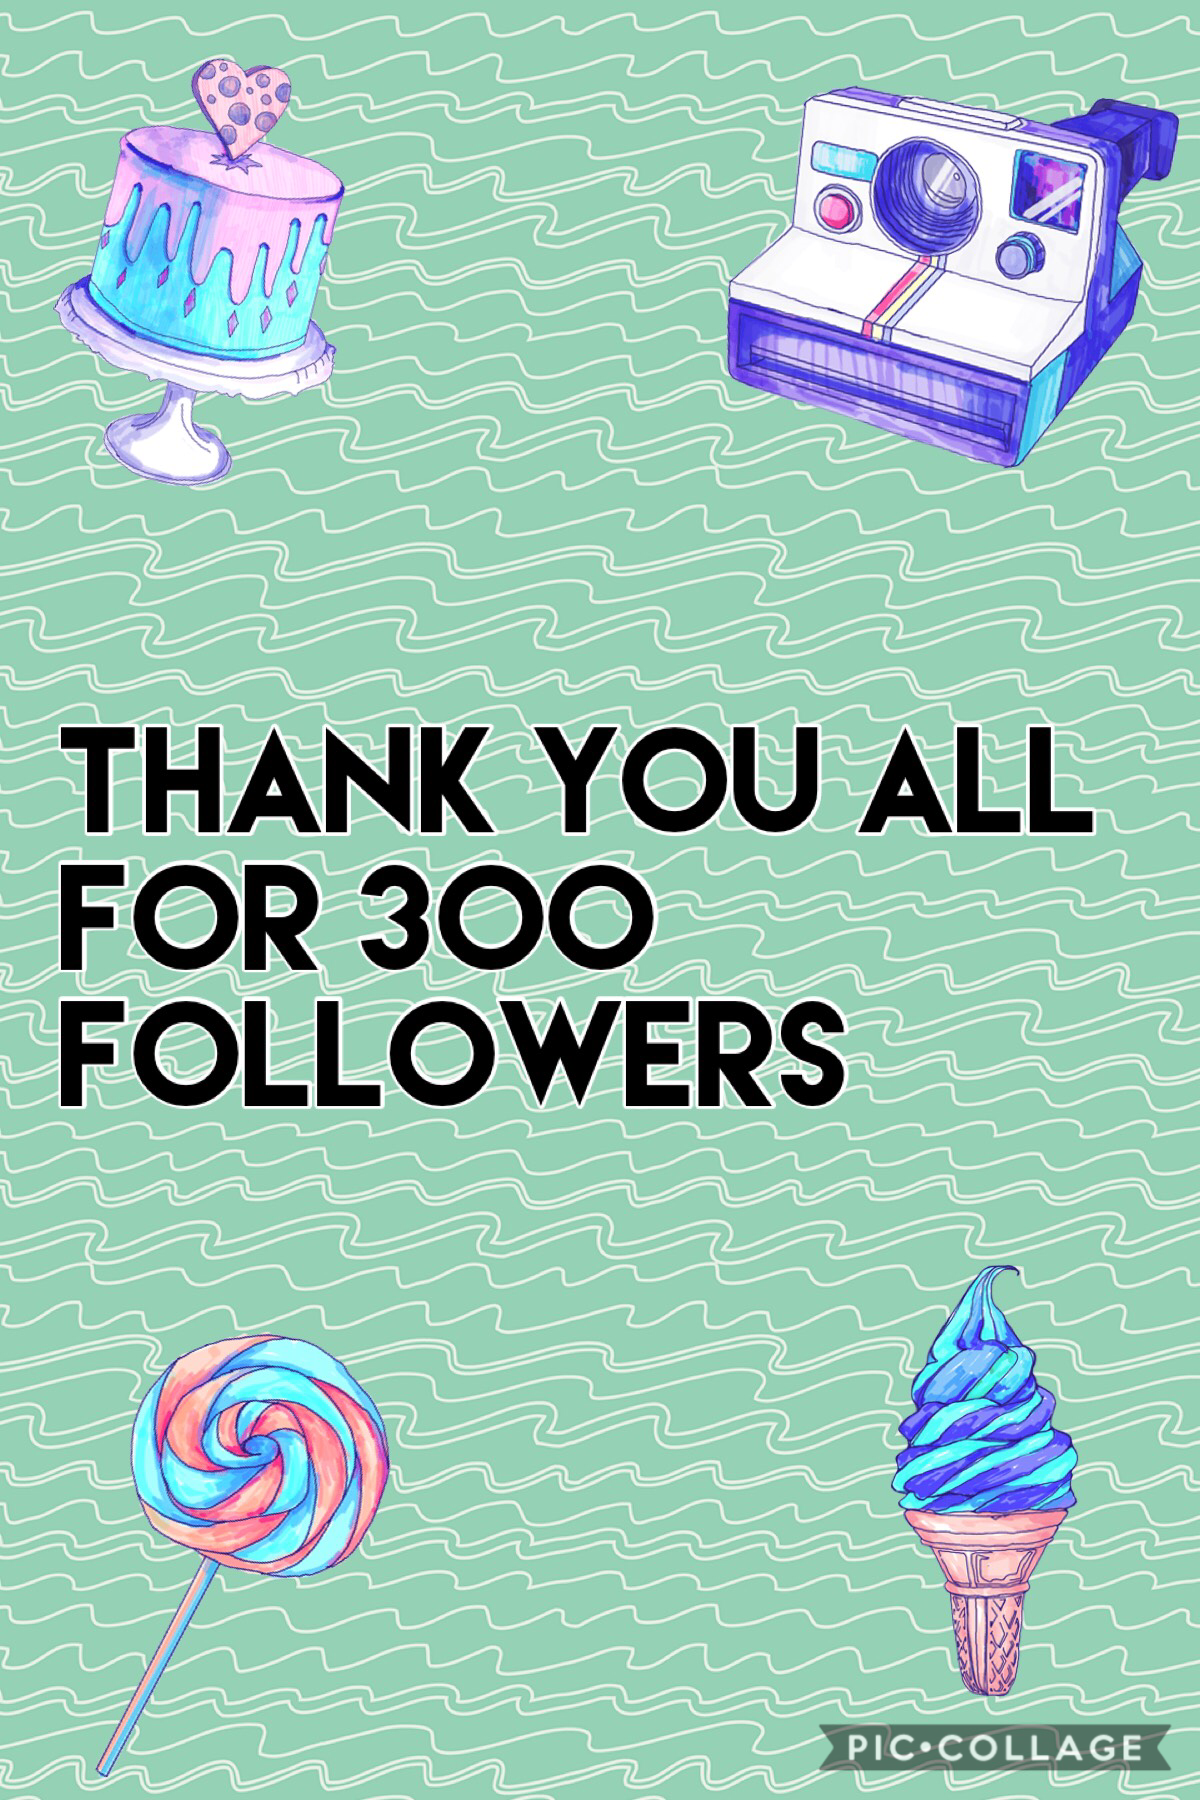 Thank you all for 300 followers 